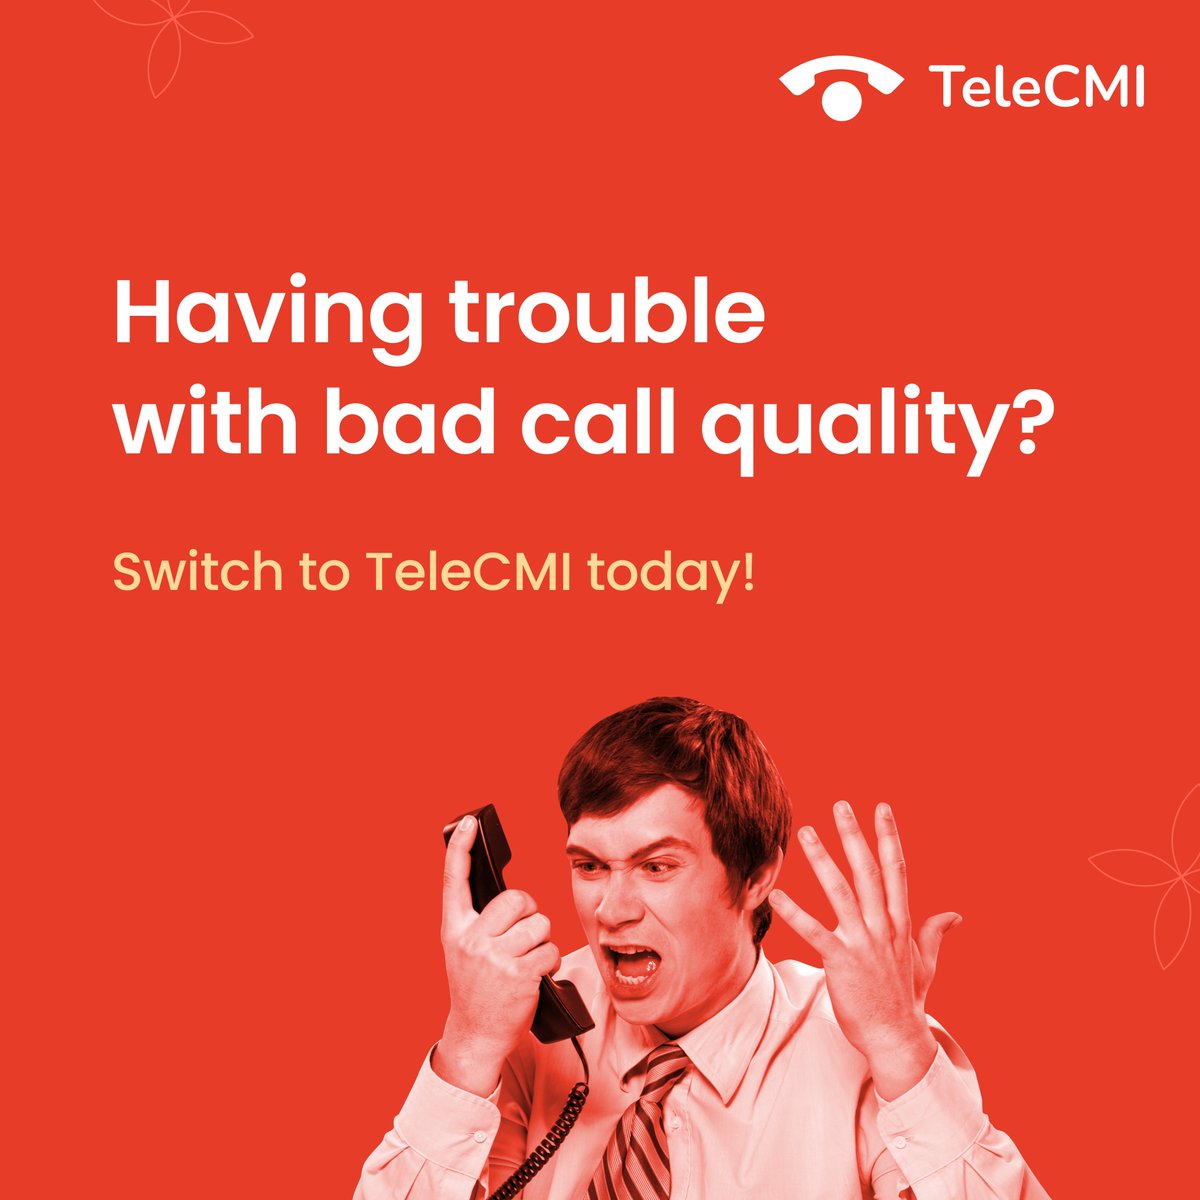 Tired of suffering from call quality issues? Try out TeleCMI to experience crystal-clear voice facilities and eye-catching features that benefit your business.

For More Info Click On Below Link:
bit.ly/3X1QH4i

#TeleCMI #CrystalClearCalls #BusinessCommunication